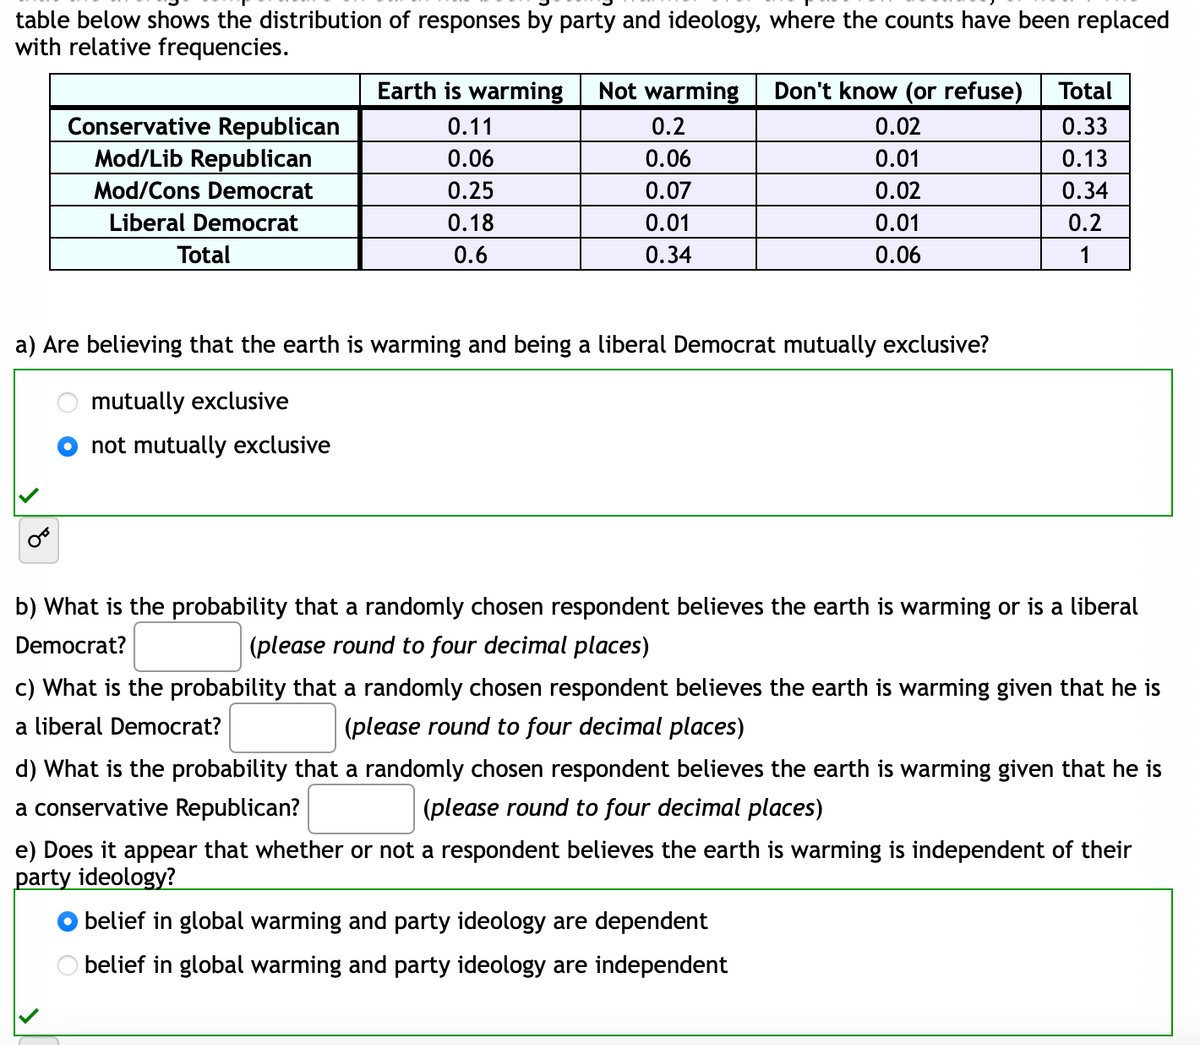 table below shows the distribution of responses by party and ideology, where the counts have been replaced
with relative frequencies.
Earth is warming
Not warming
Don't know (or refuse)
Total
Conservative Republican
Mod/Lib Republican
0.11
0.2
0.02
0.33
0.06
0.06
0.01
0.13
Mod/Cons Democrat
0.25
0.07
0.02
0.34
Liberal Democrat
0.18
0.01
0.01
0.2
Total
0.6
0.34
0.06
1
a) Are believing that the earth is warming and being a liberal Democrat mutually exclusive?
mutually exclusive
not mutually exclusive
b) What is the probability that a randomly chosen respondent believes the earth is warming or is a liberal
Democrat?
(please round to four decimal places)
c) What is the probability that a randomly chosen respondent believes the earth is warming given that he is
a liberal Democrat?
(please round to four decimal places)
d) What is the probability that a randomly chosen respondent believes the earth is warming given that he is
a conservative Republican?
(please round to four decimal places)
e) Does it appear that whether or not a respondent believes the earth is warming is independent of their
party ideology?
belief in global warming and party ideology are dependent
O belief in global warming and party ideology are independent
